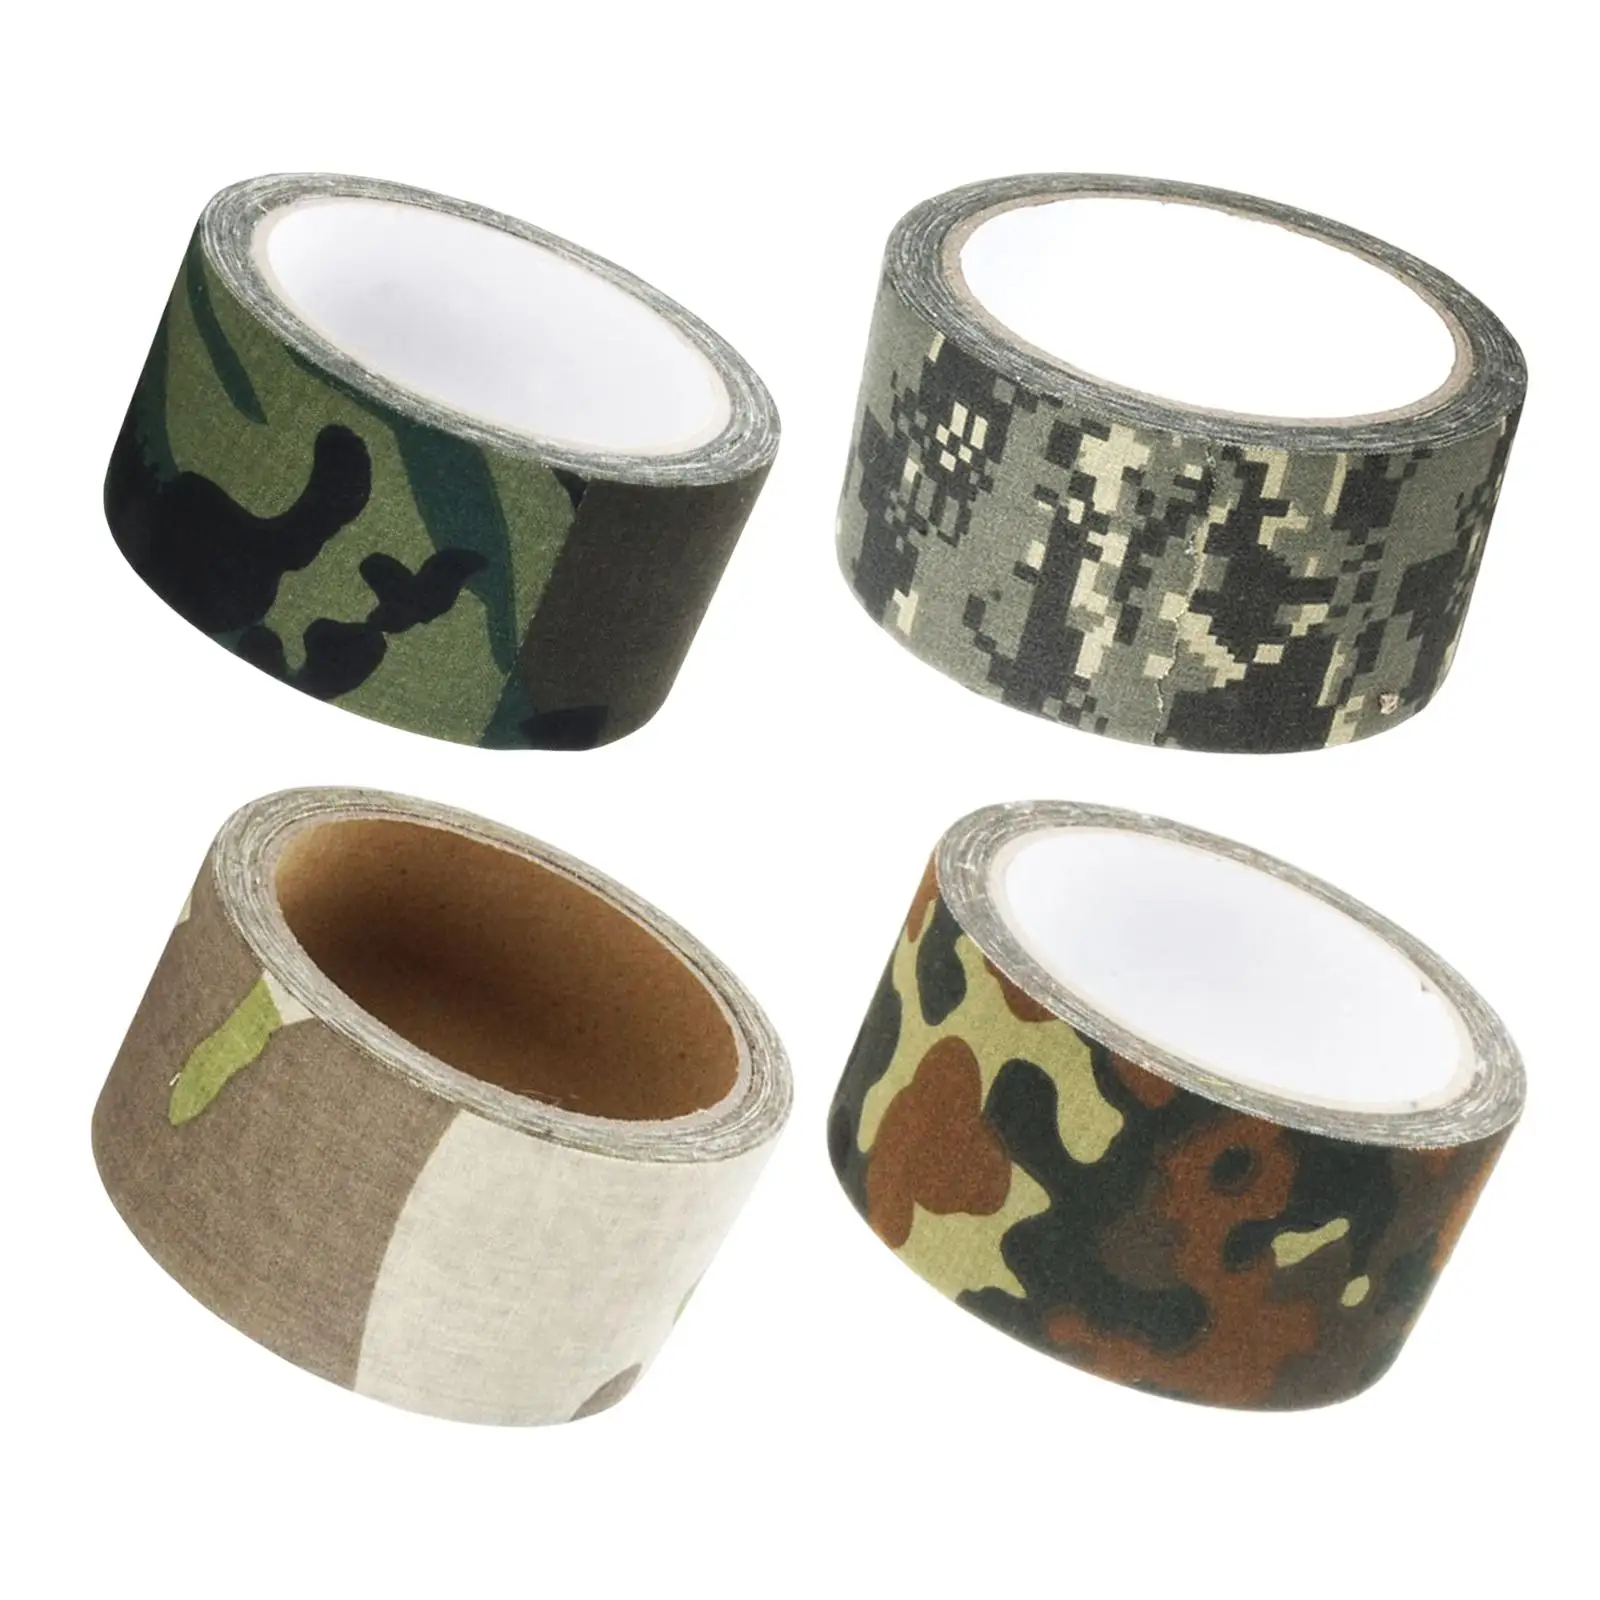 Self Adhesive Tape Self Adhesive for Hunting Wildlife Photography Outdoor